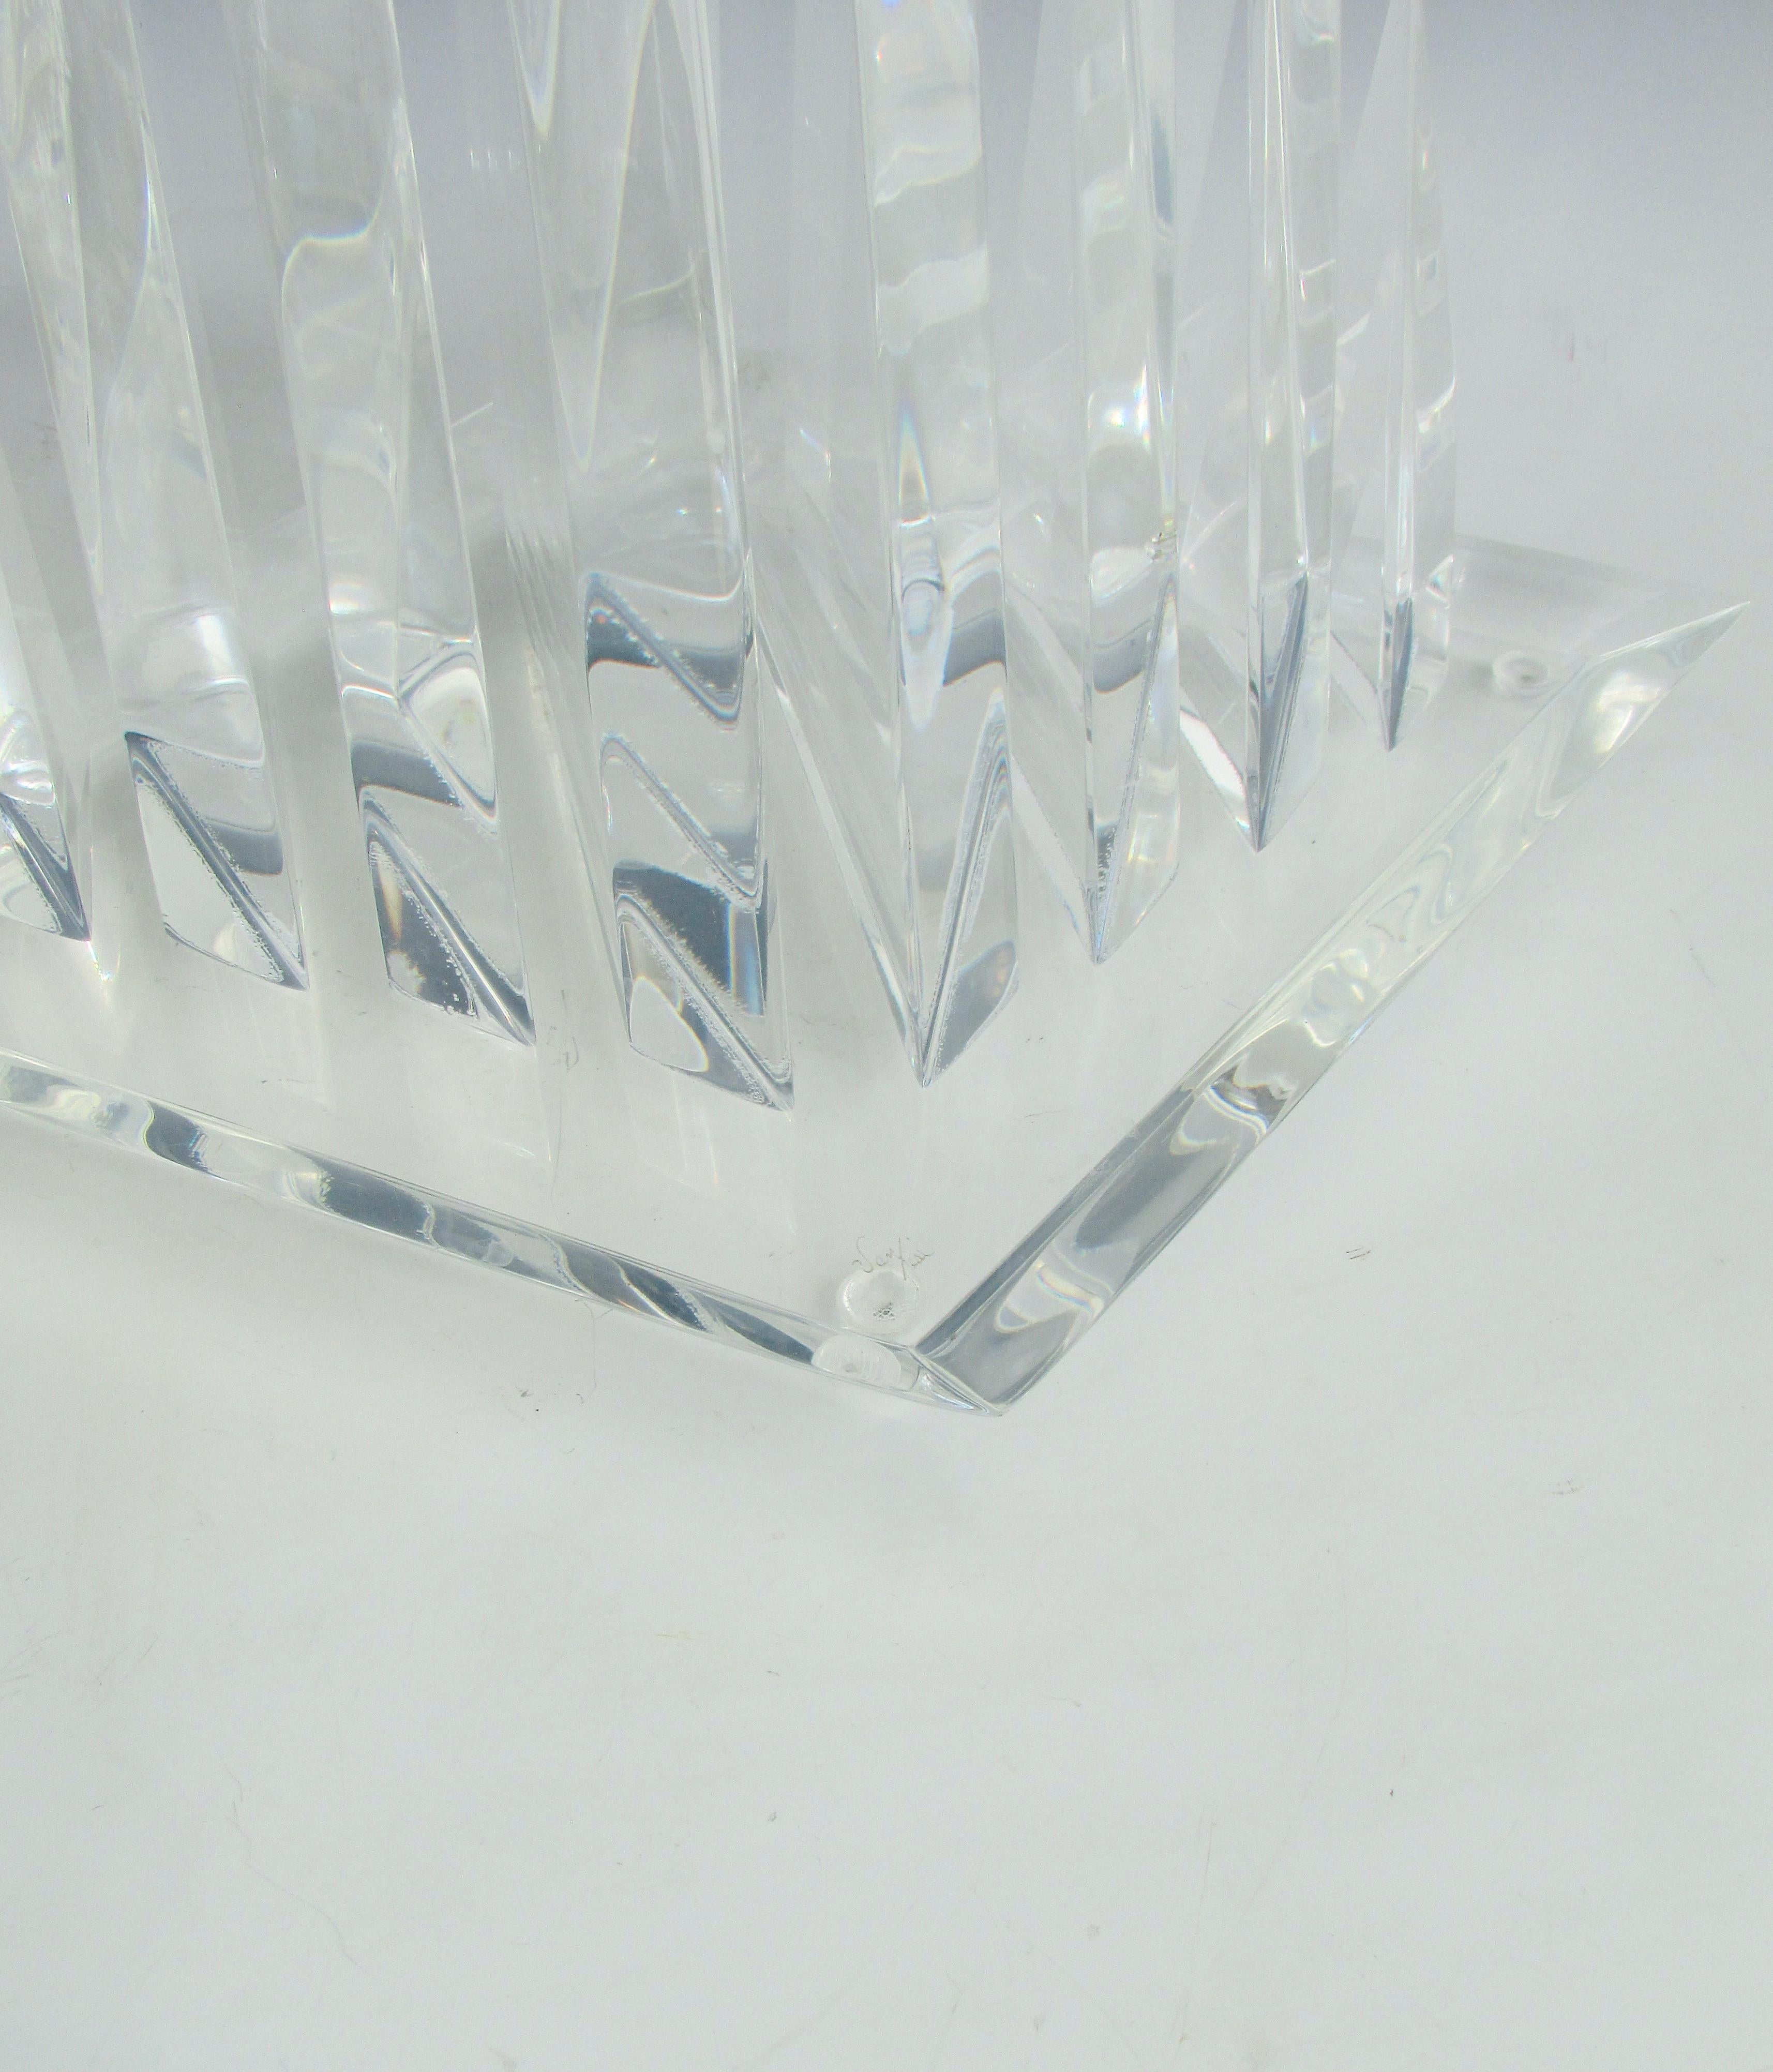 Hivo Van Teal Segmented Lucite Pyramid, Triangle Sculpture In Good Condition For Sale In Ferndale, MI